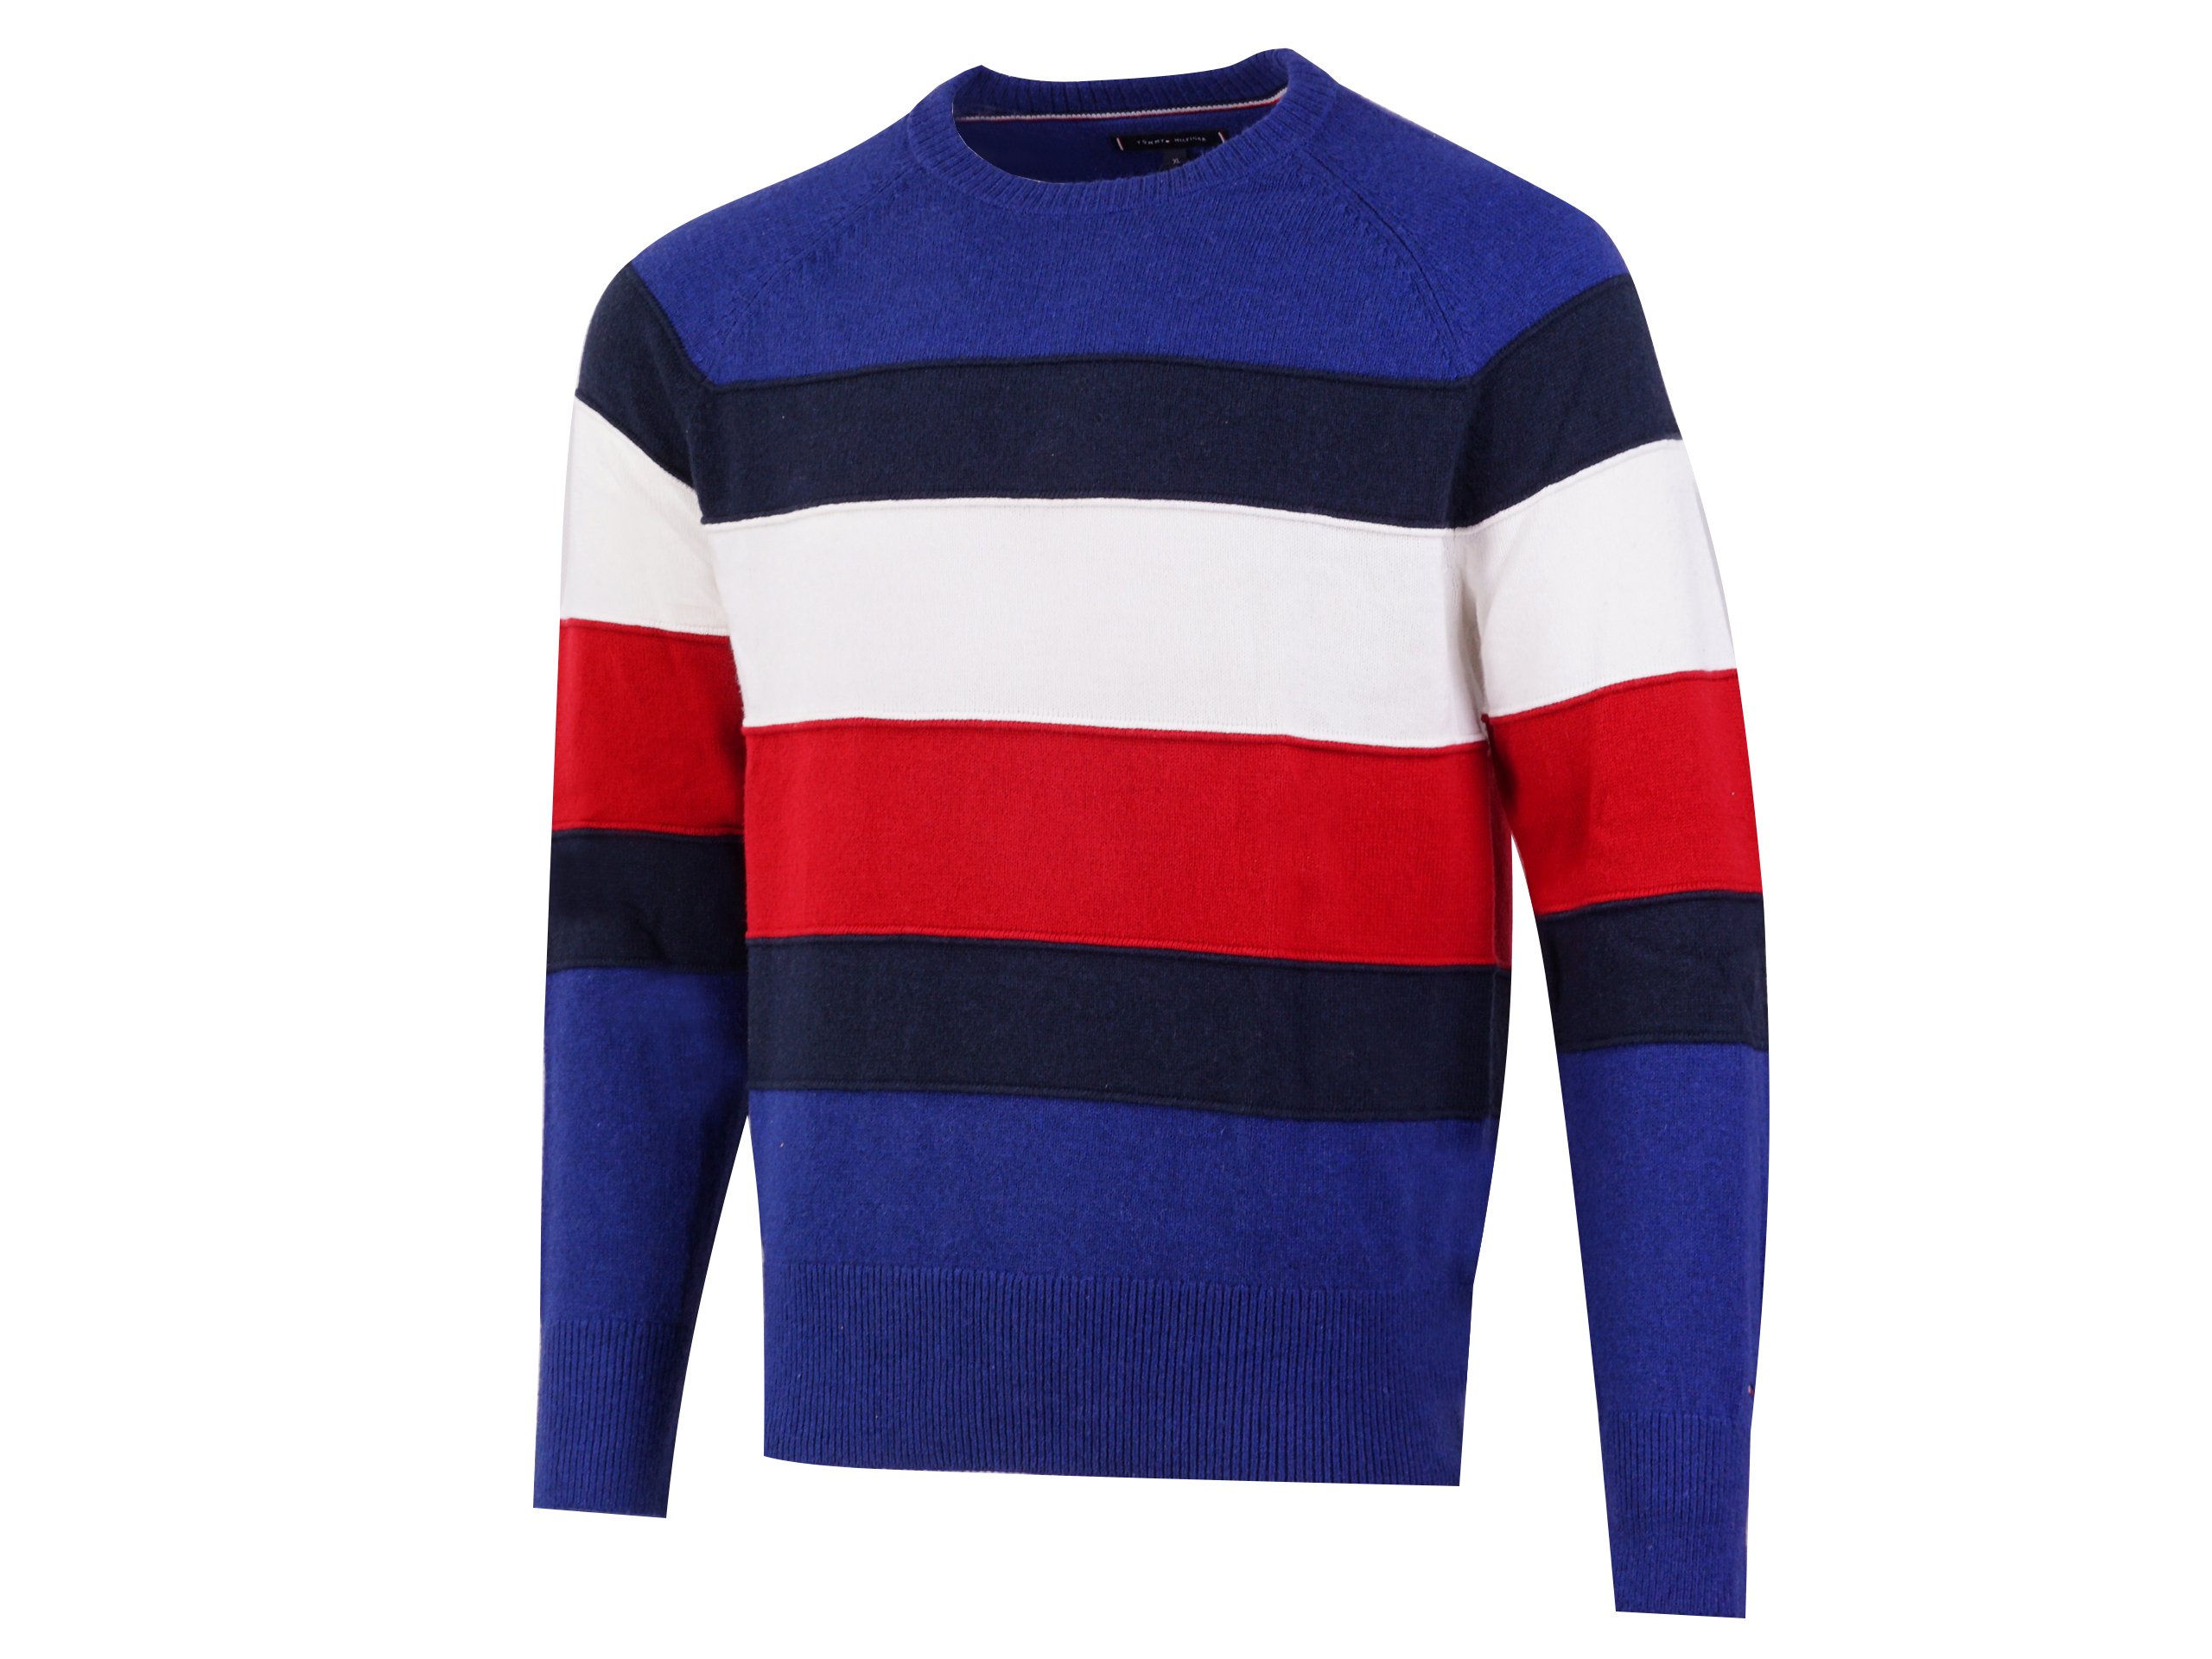 Tommy Hilfiger - Colorblock Stripe / White Mens Sweater | - Hilfiger sports | of \\ - Blue supplier a MW0MW07853-436 / - branded / footwear Navy Red Tommy Sport trusted Kicks